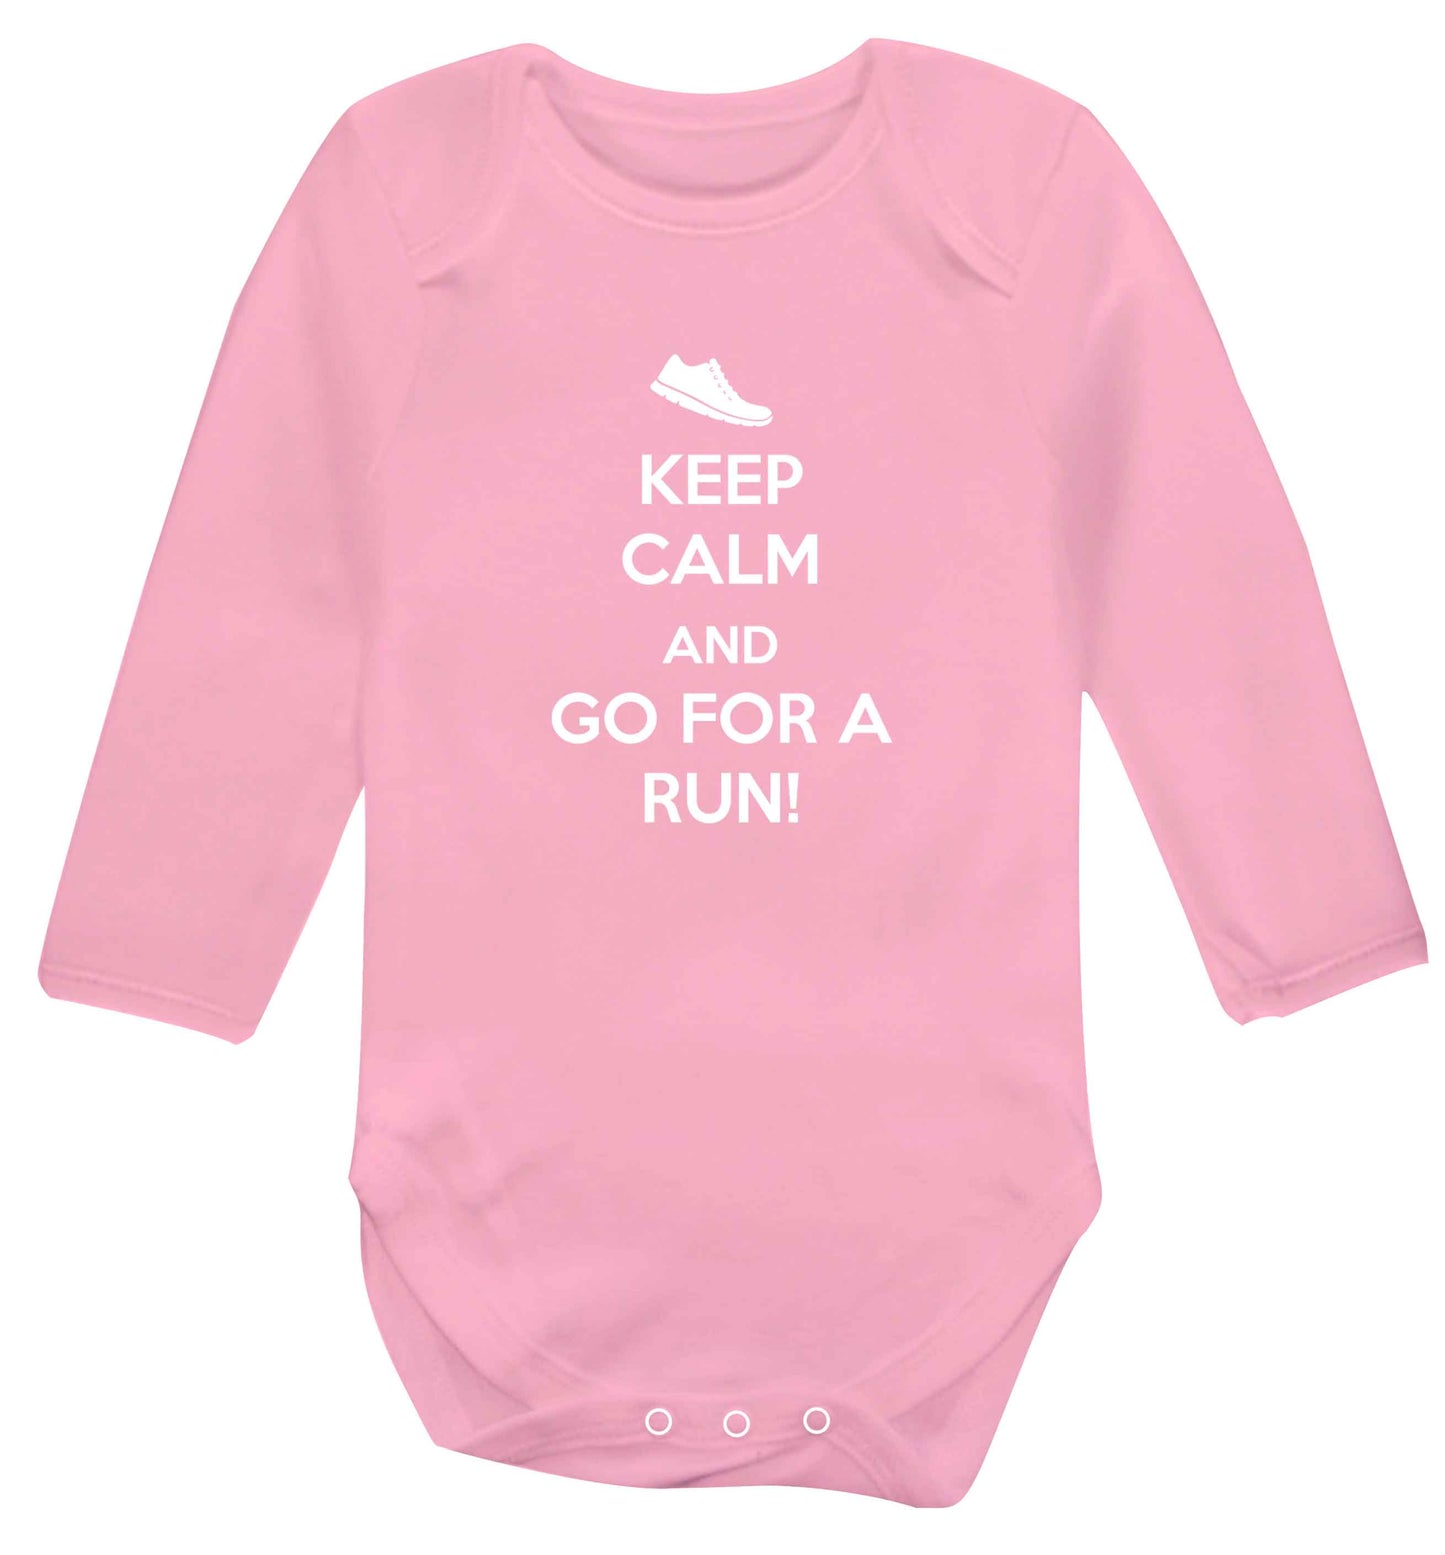 Keep calm and go for a run baby vest long sleeved pale pink 6-12 months